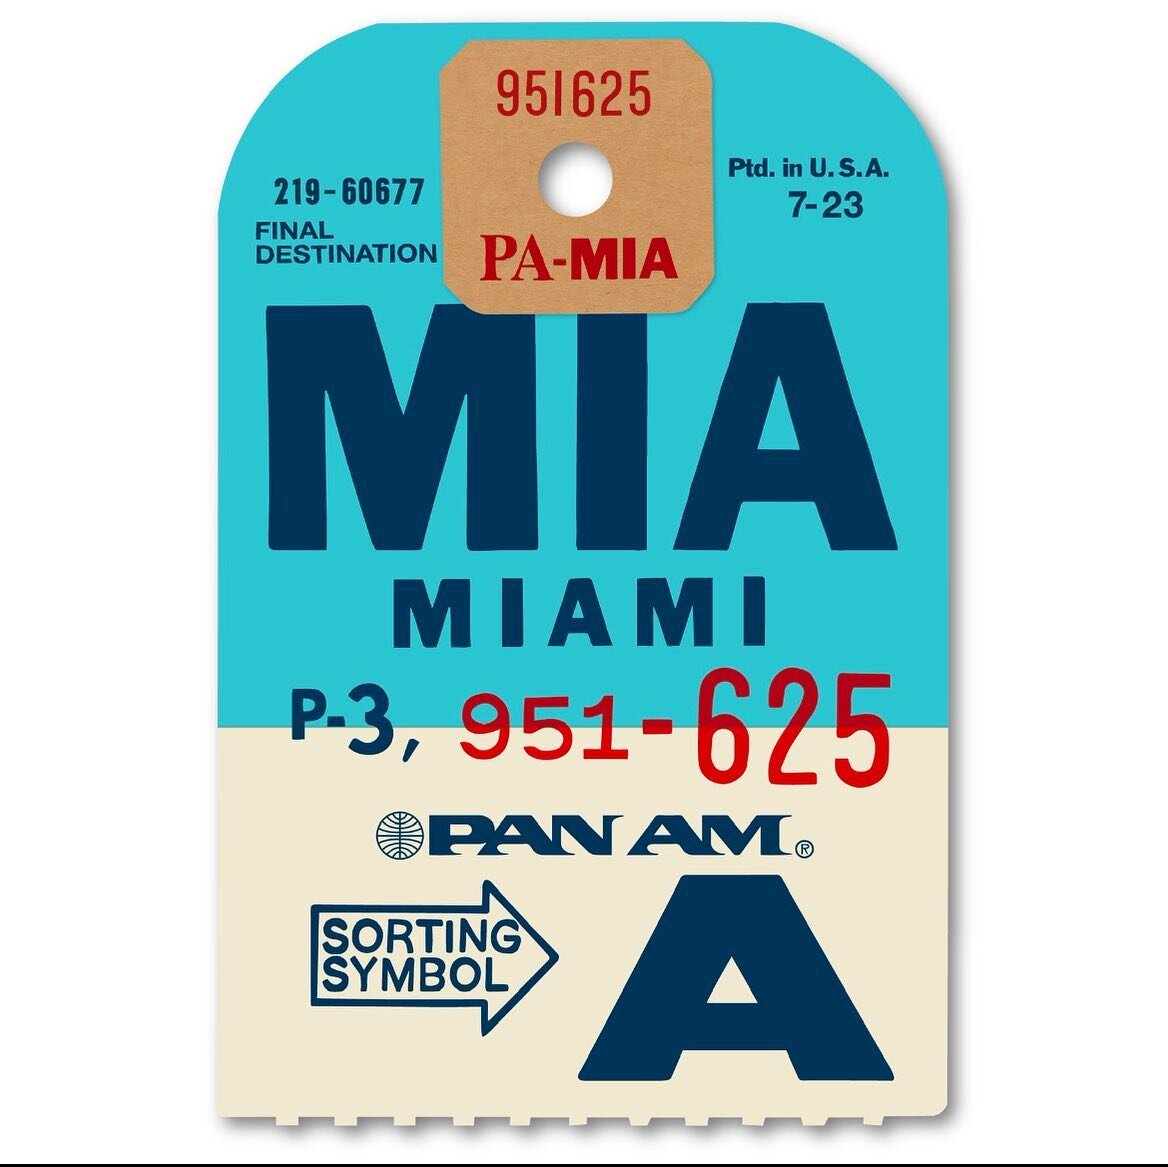 Miami Pan Am landing at &ldquo; Spectrum&rdquo; I will be showing this limited edition luggage tag @ella_freire in our group show @jmgallerylondon Portobello Road, in just over a week on the 7- 19 September.

I am exhibiting with the wonderful @lovej